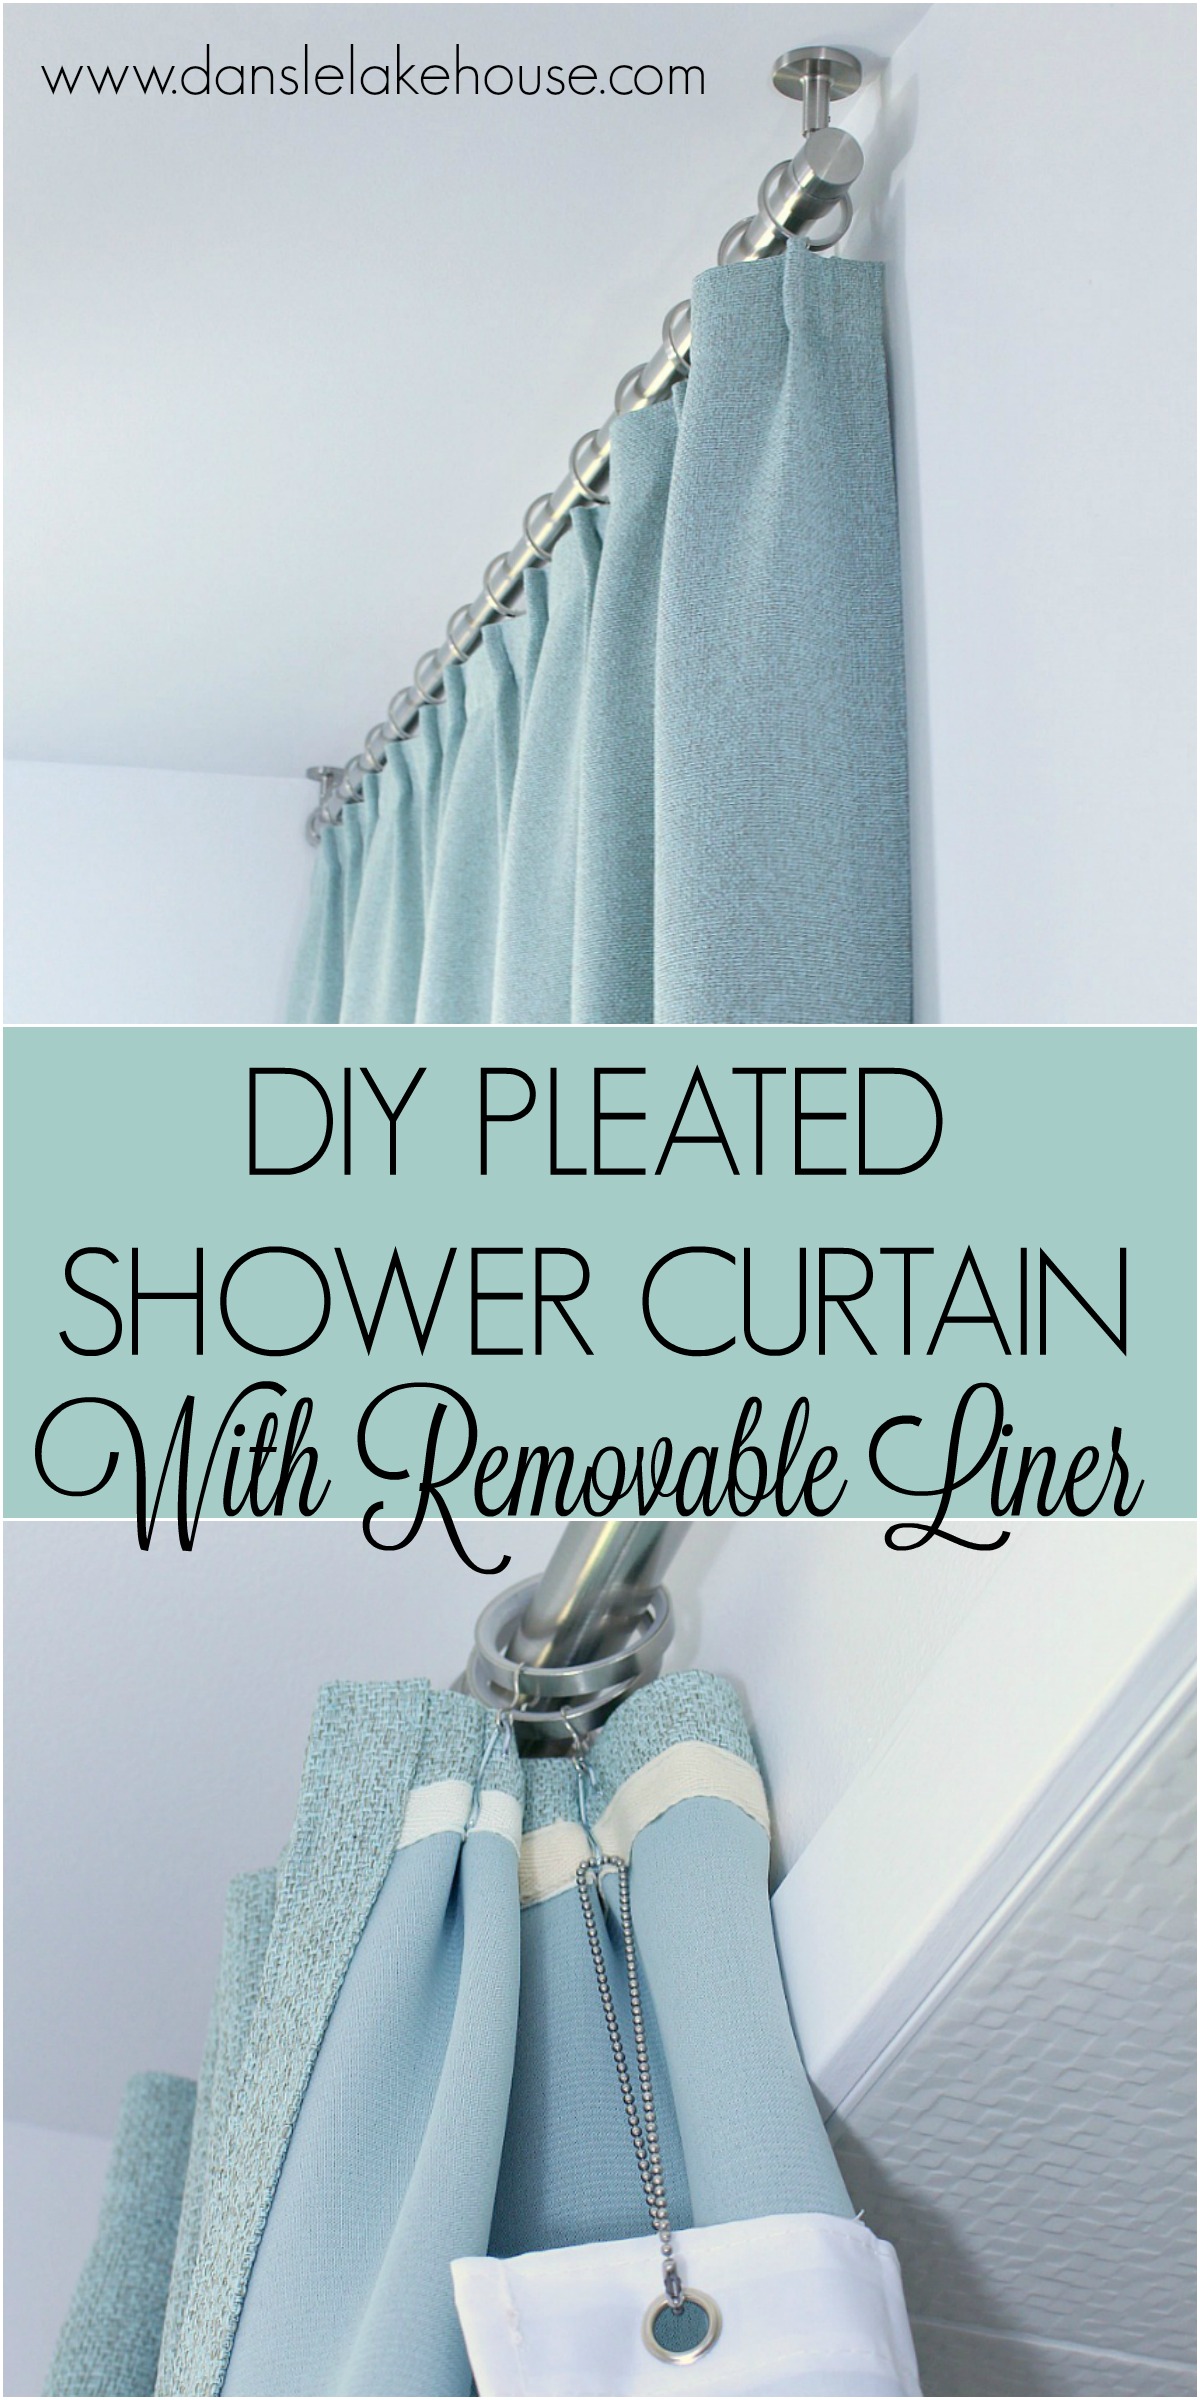 Bathroom Update: Ceiling Mounted Shower Curtain Rod + DIY Pleated Shower Curtain